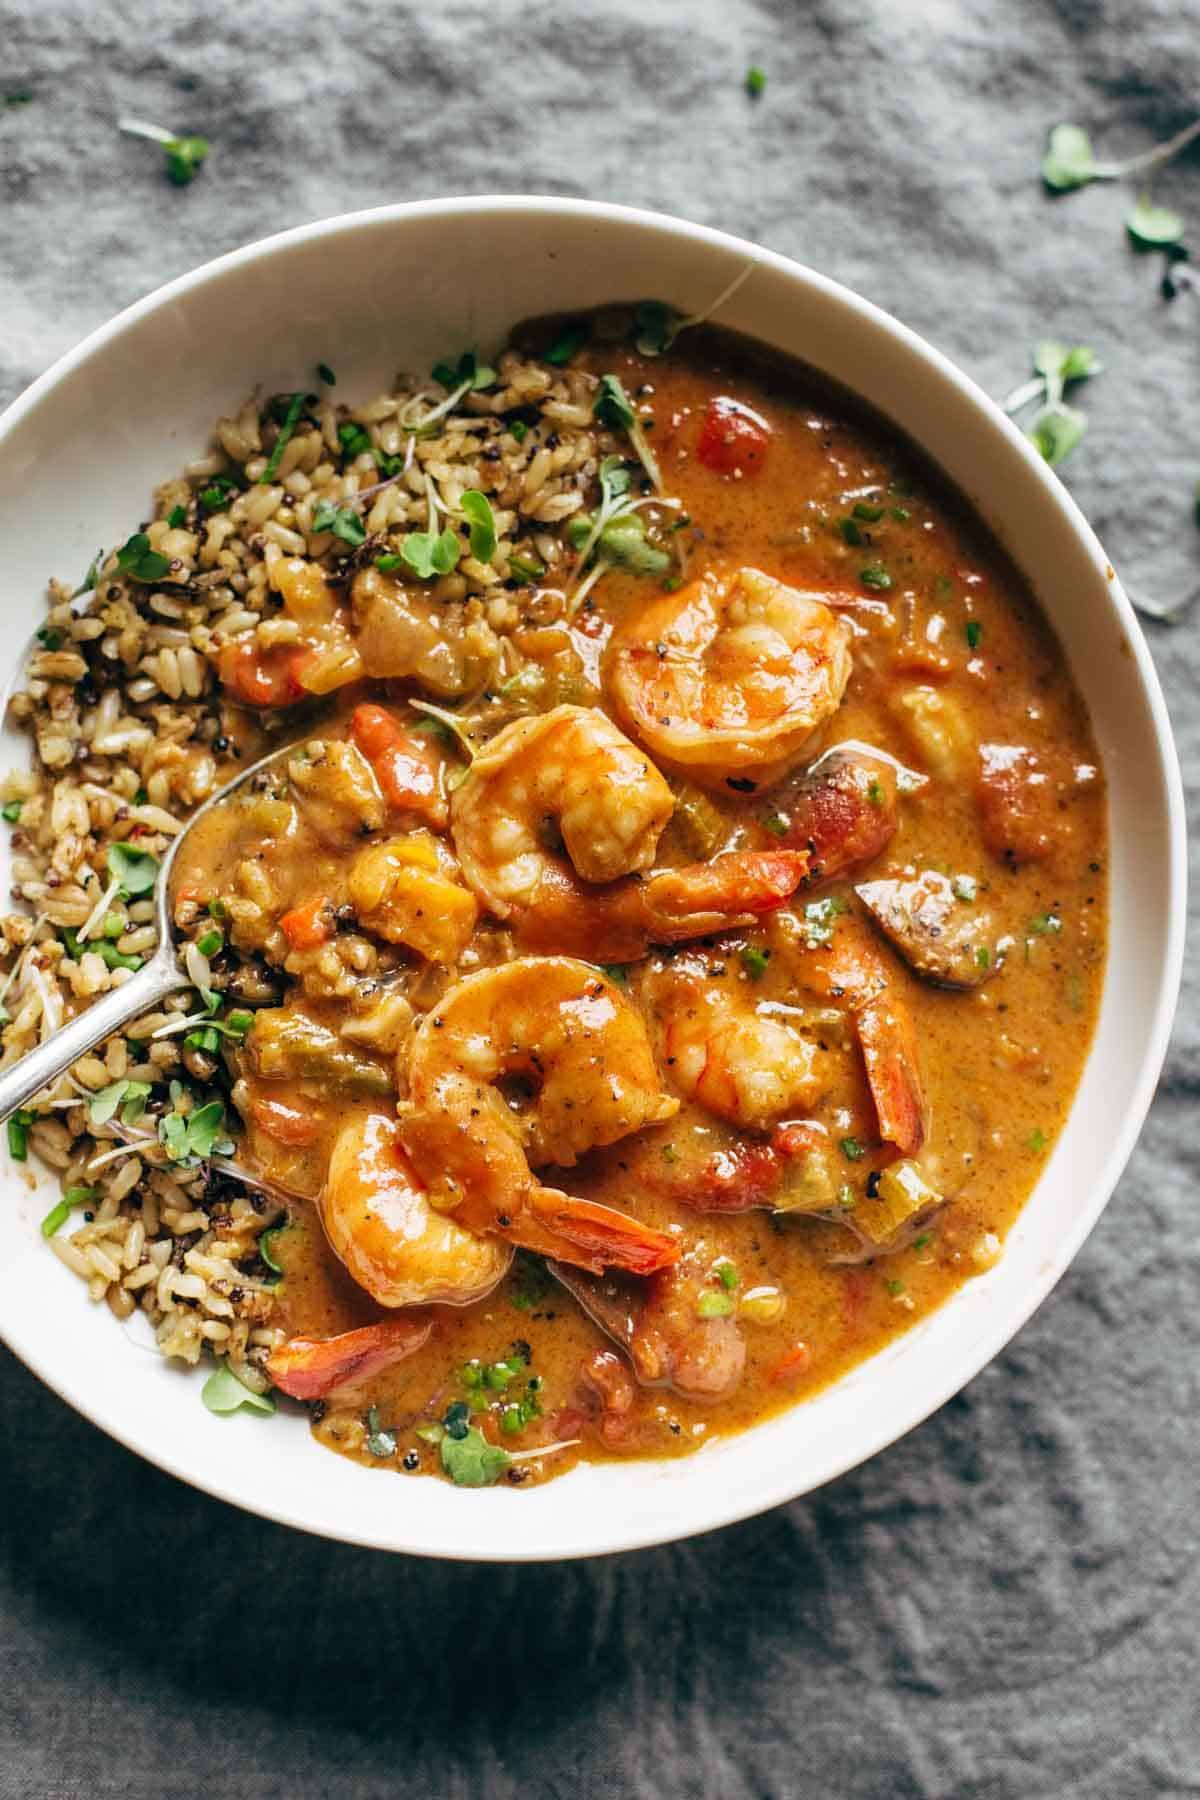 Spicy Weekend Gumbo with Shrimp and Sausage